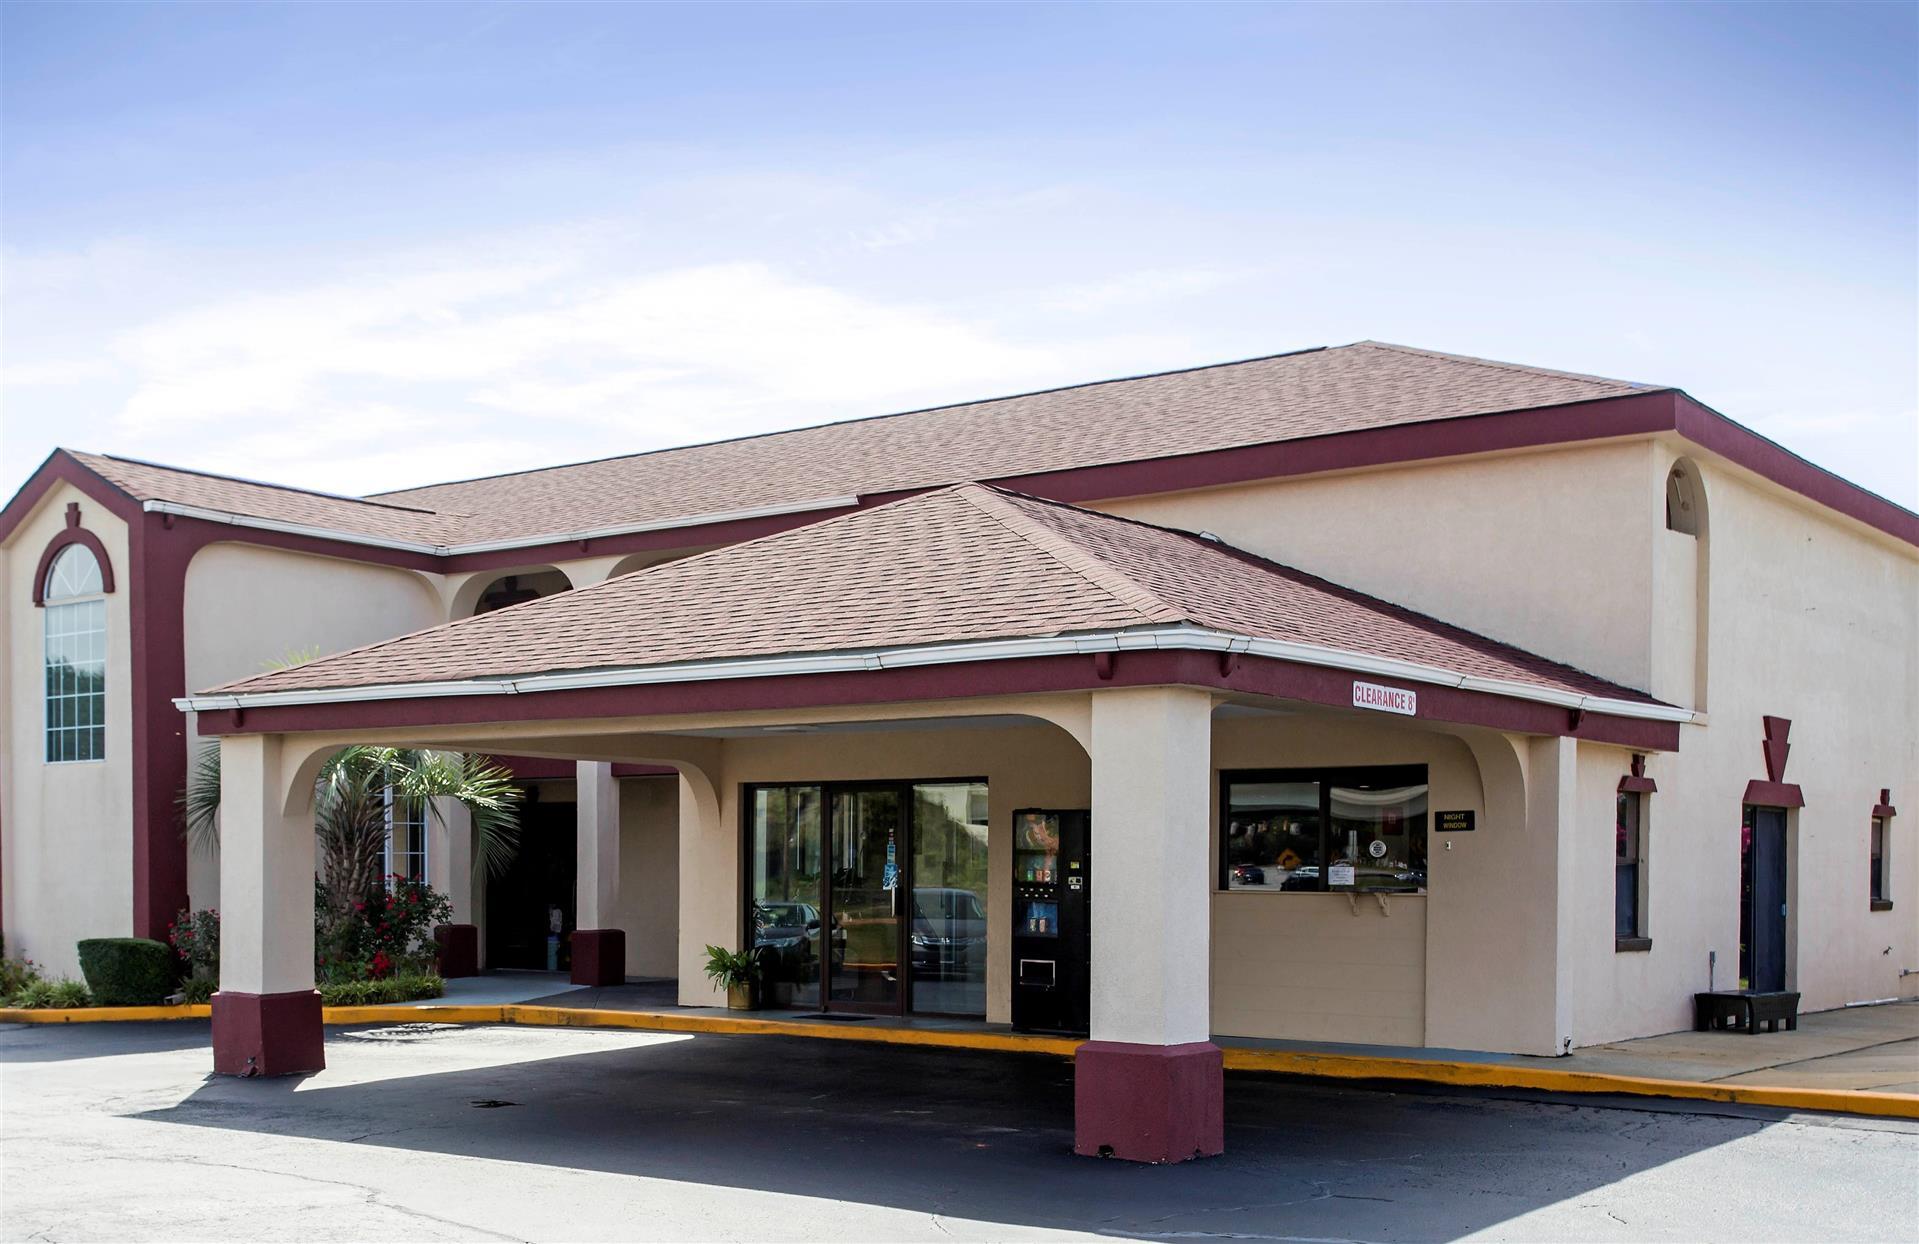 Red Roof Inn Sumter in Sumter, SC